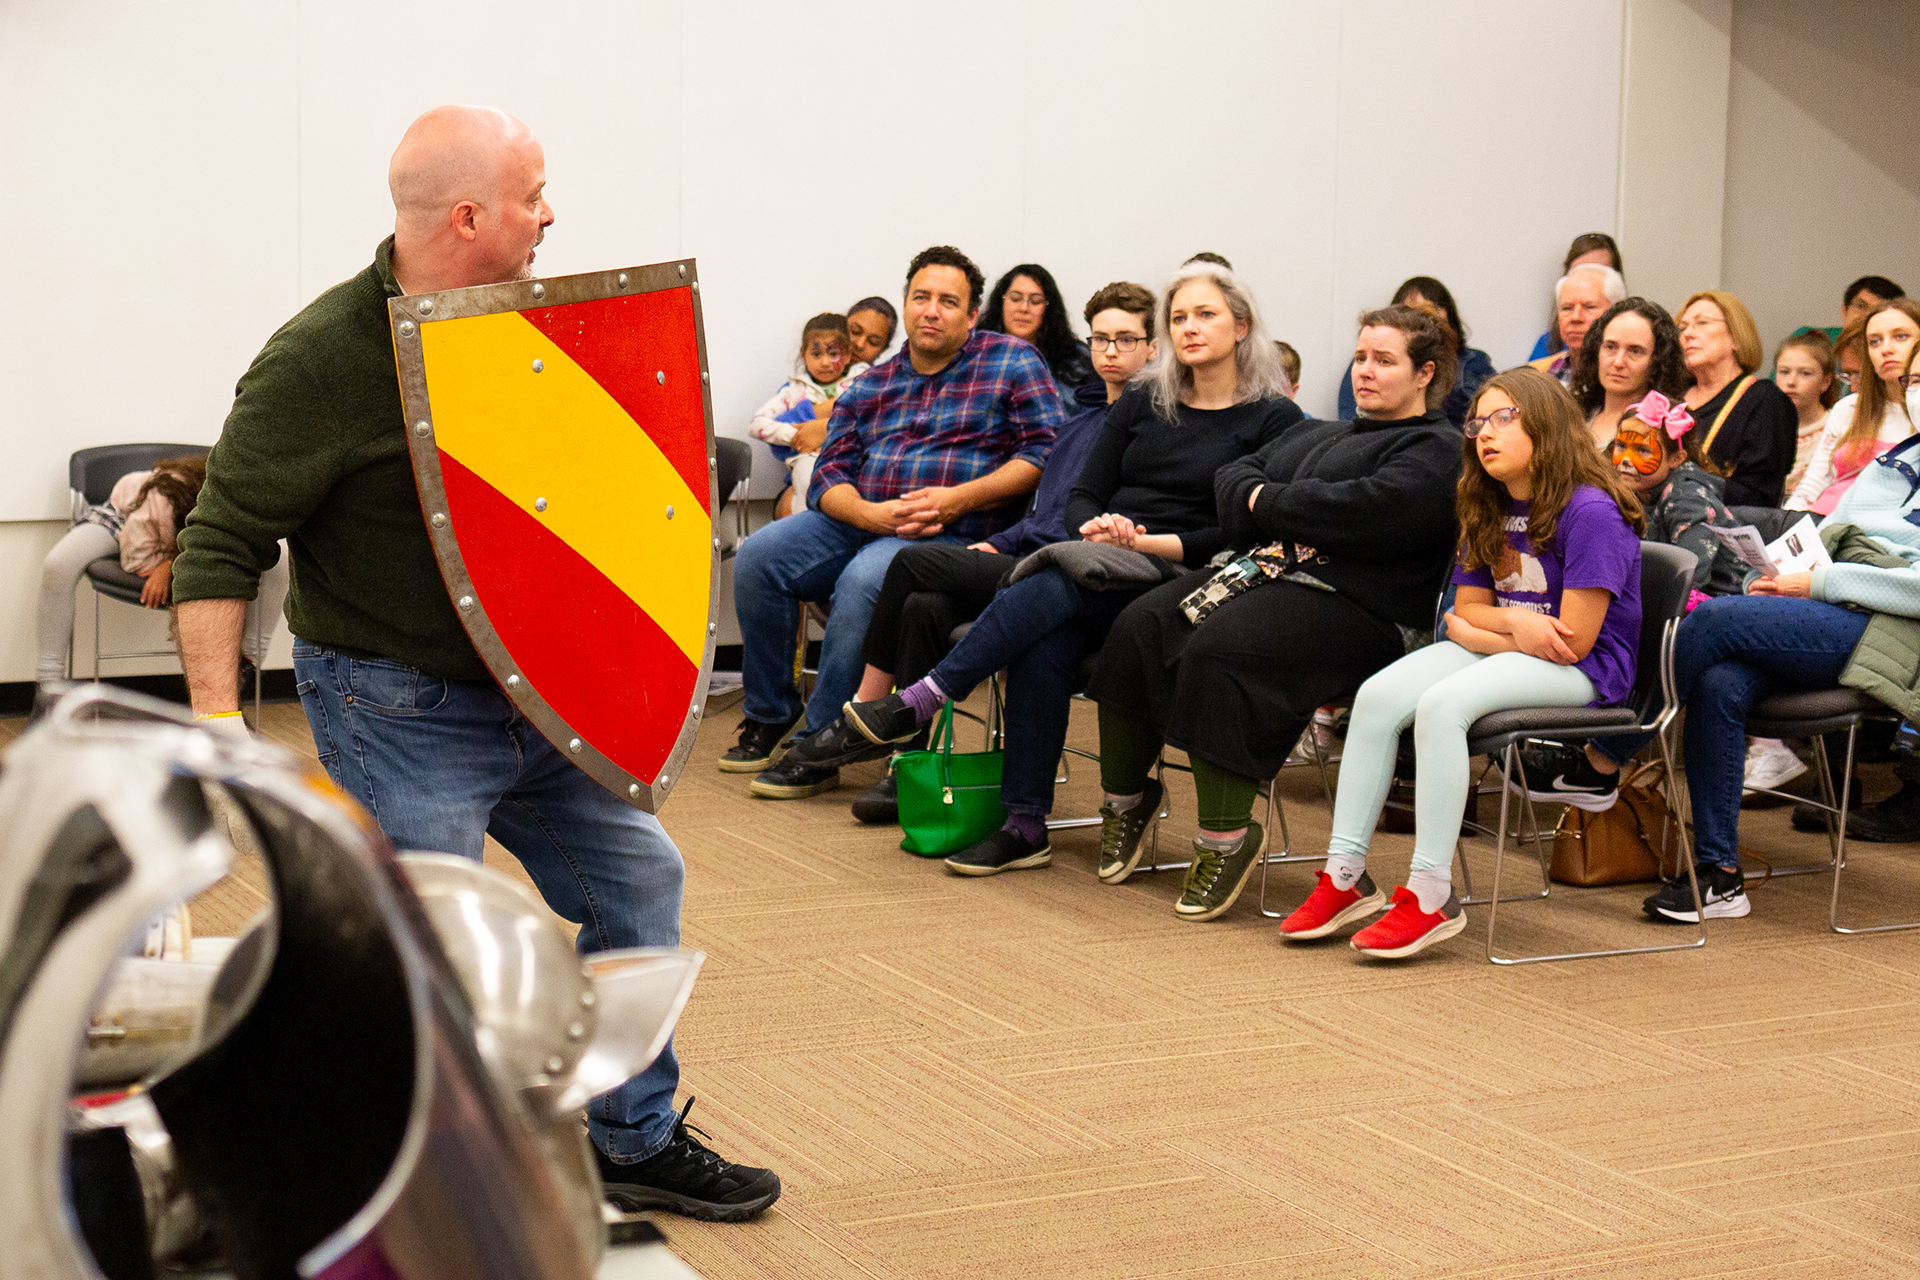 An educator holds up a shield in front of a seated audience